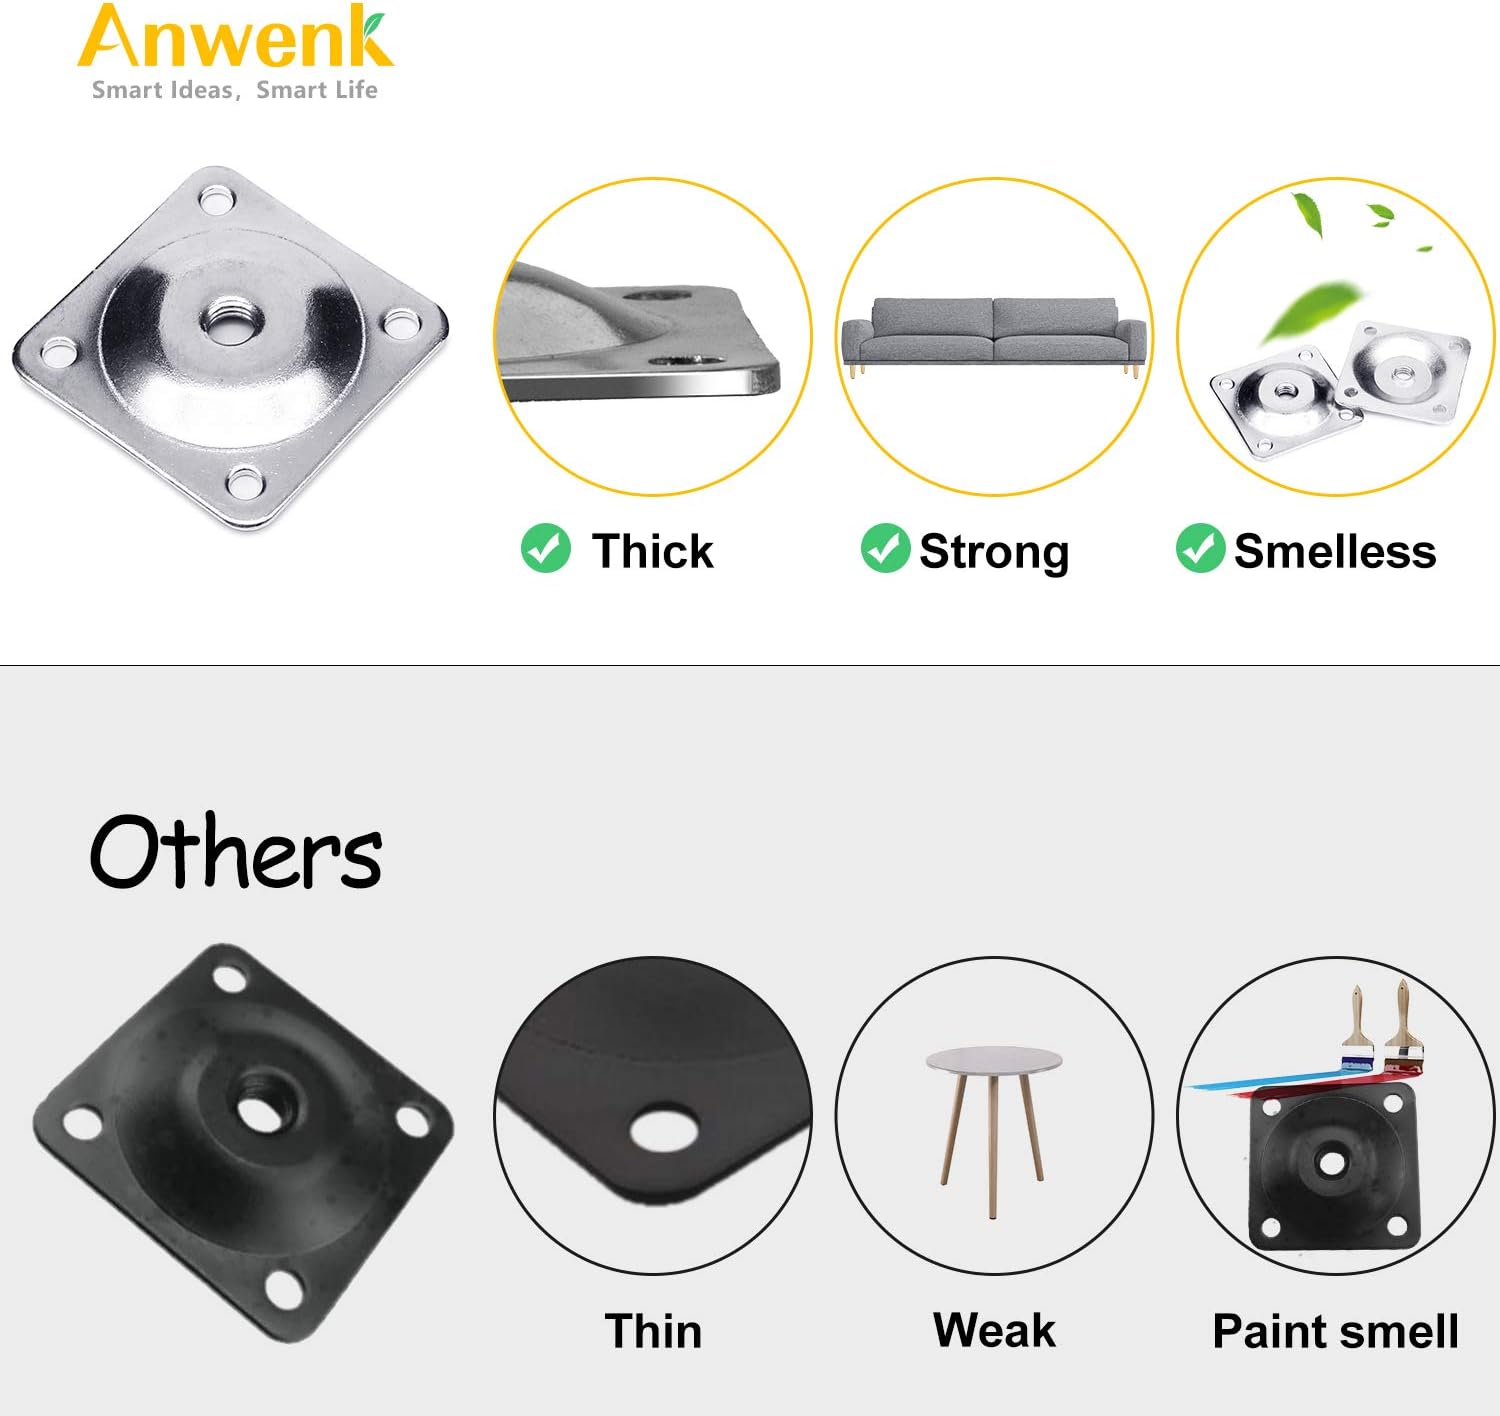 Anwenk Leg Mounting Plates, Furniture Leg Attachment Plates Industrial Strength T-Plate 5/16" (M8) Sofa Legs with Hanger Bolts,Sc